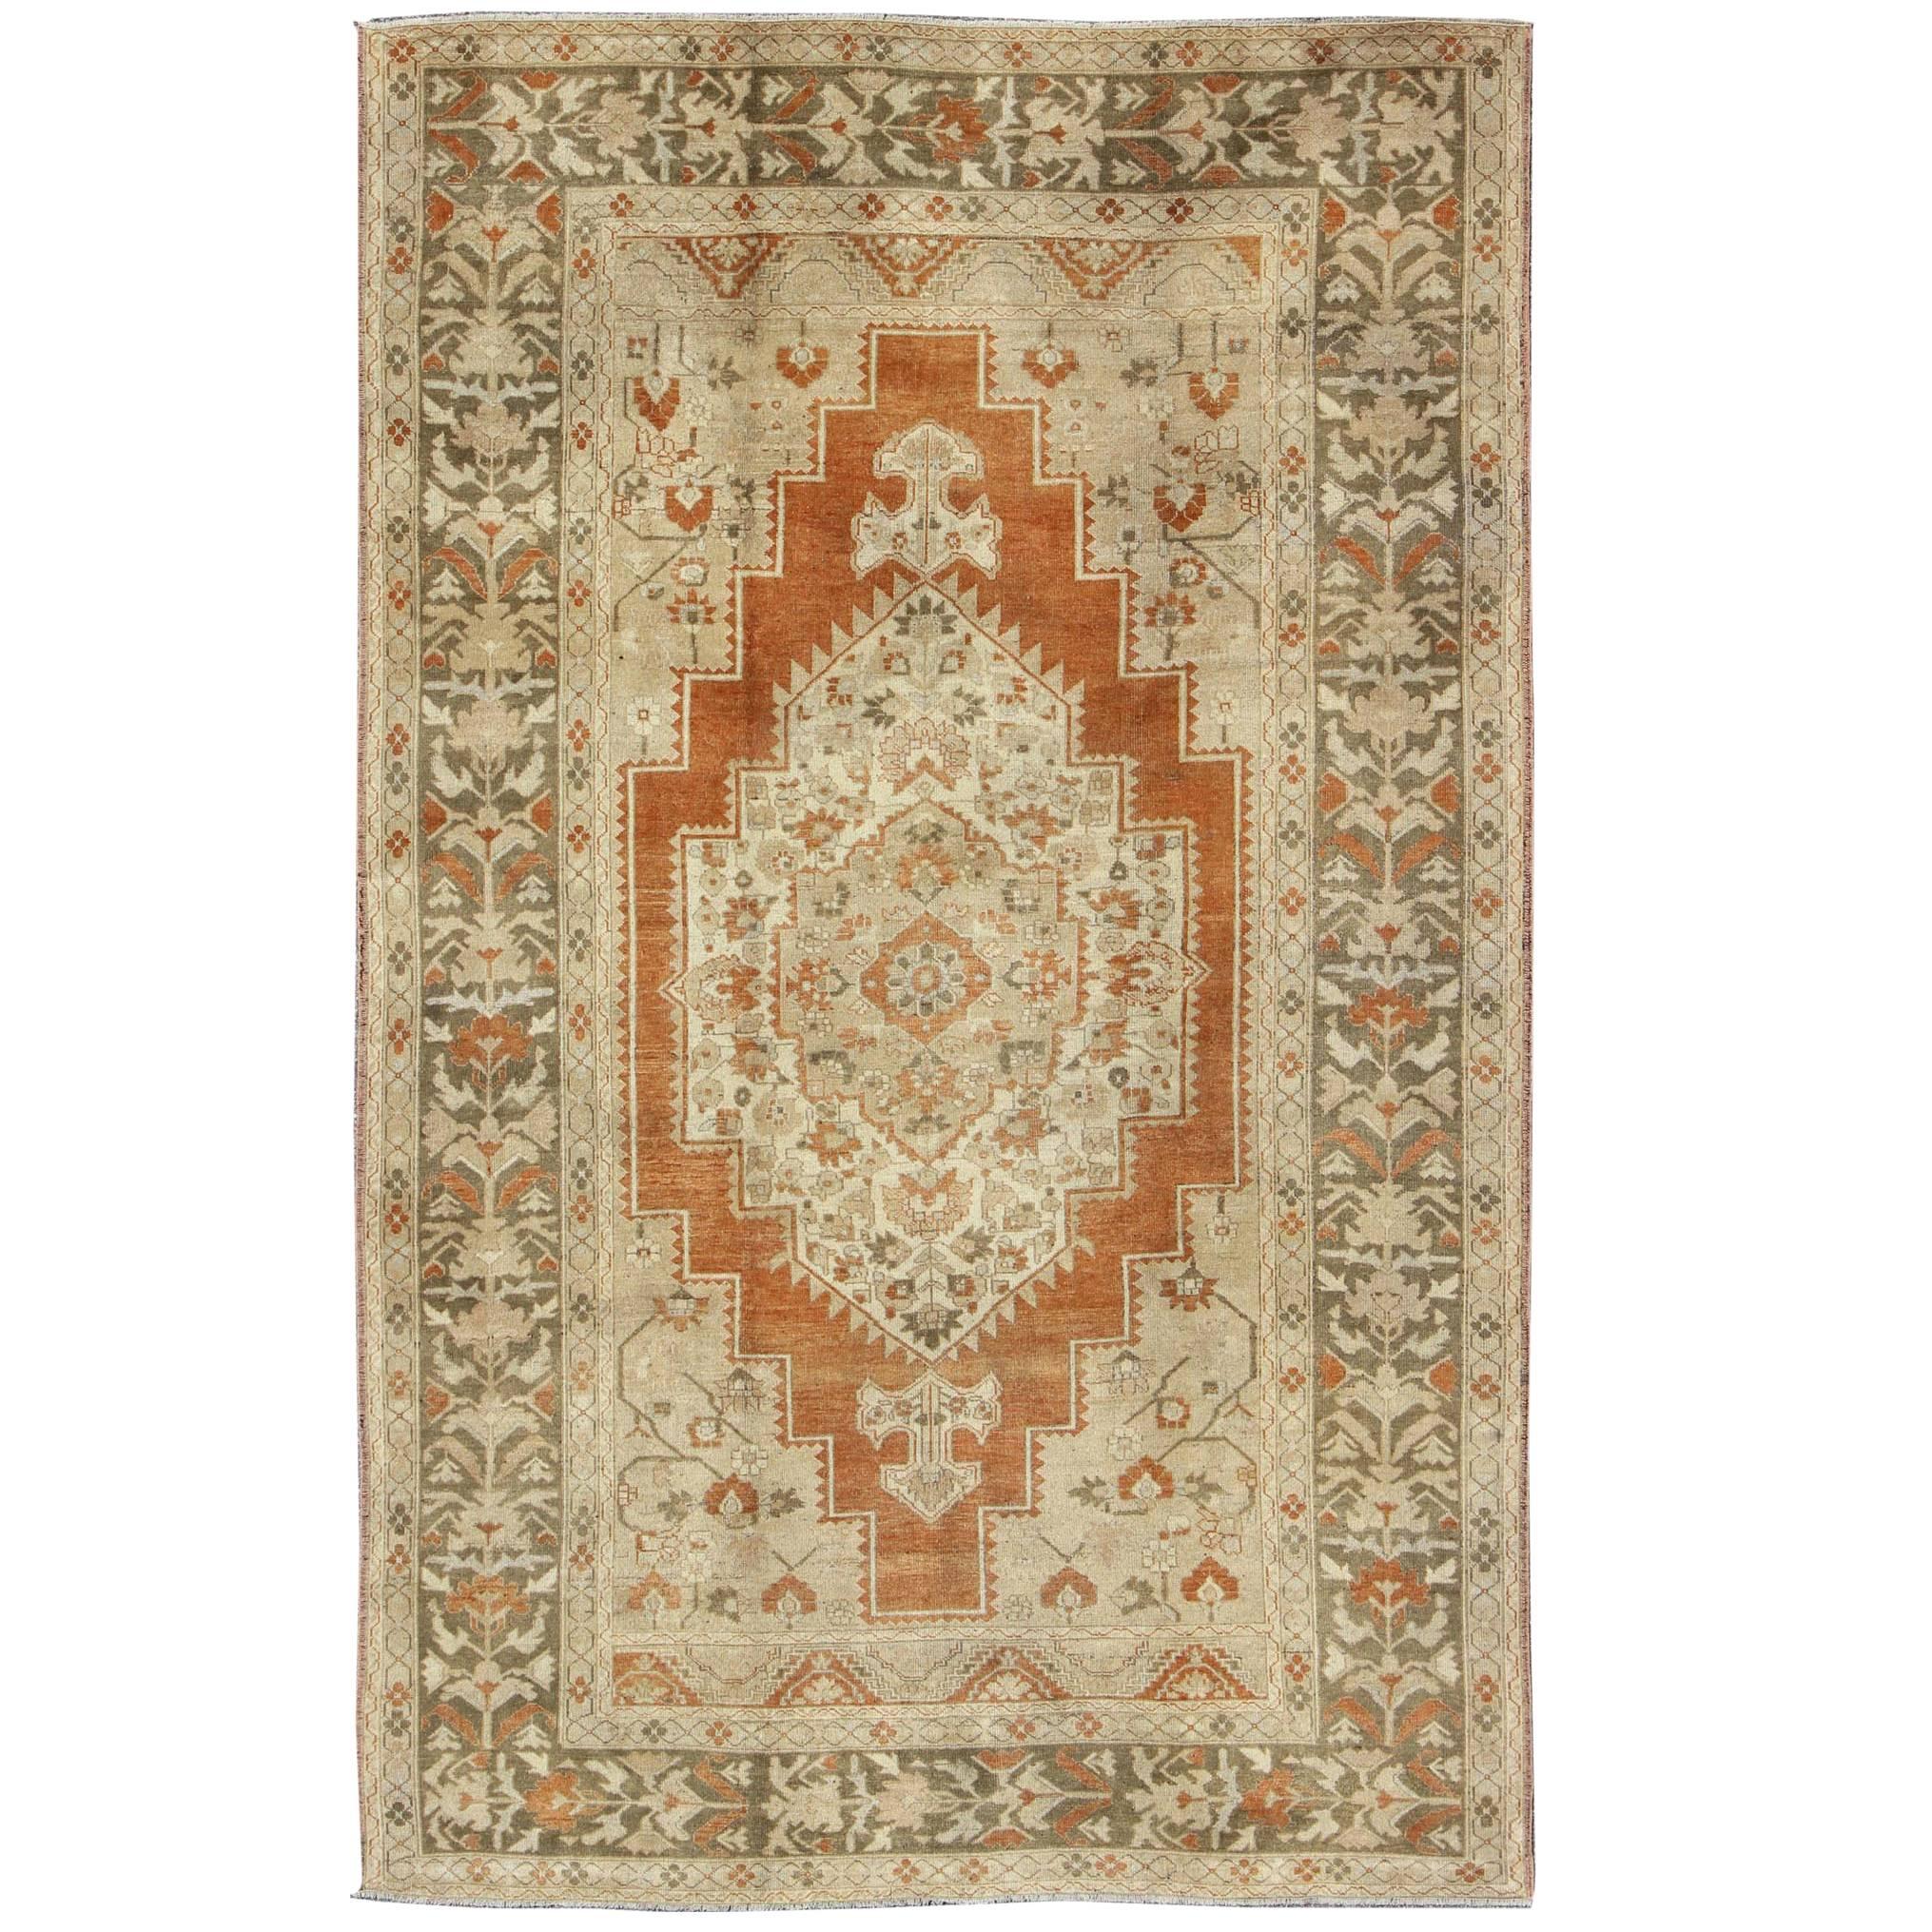 Vintage Turkish Oushak Rug in Rust, Green, Cream, Tape and Neutral Colors